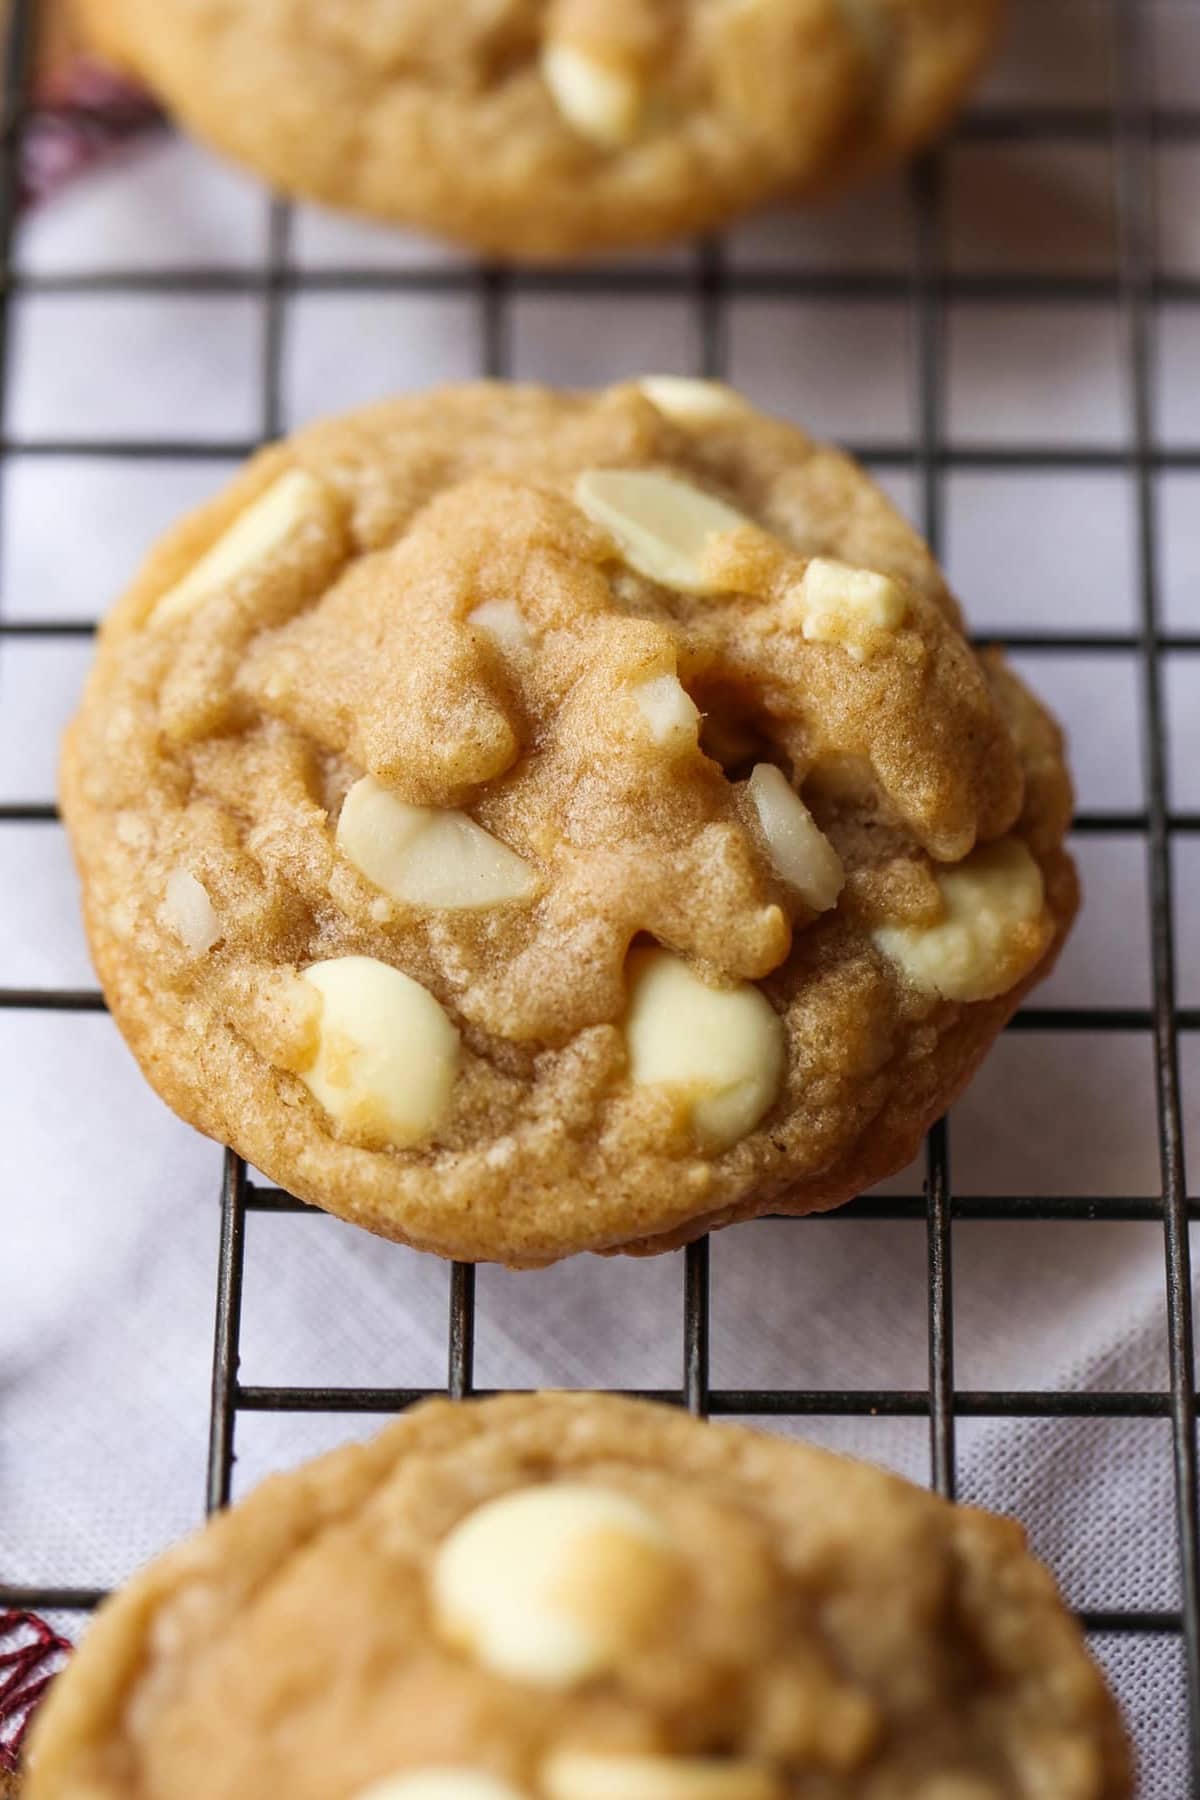 A baked white chocolate macadamia nut cookie on a wire cooling rack